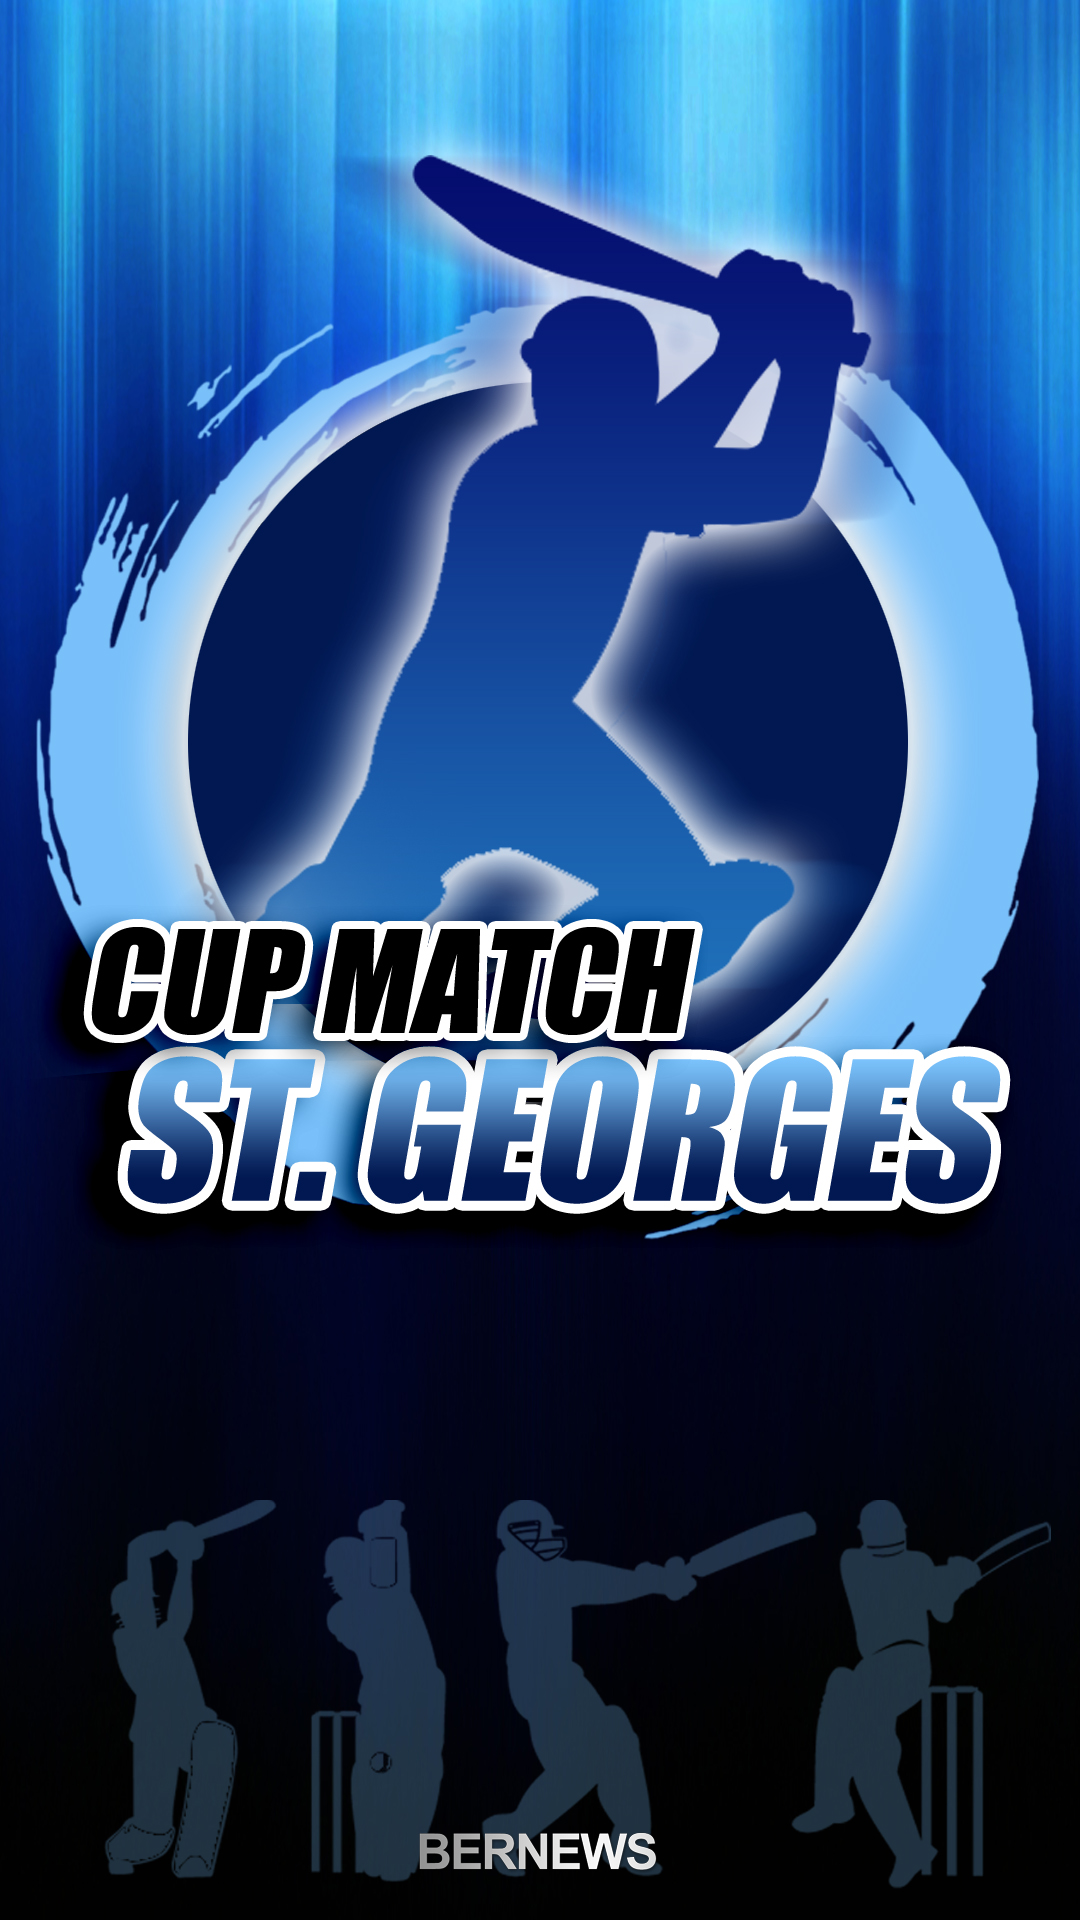 Bermuda free Cup Match iphone wallpaper graphics (1) St Georges